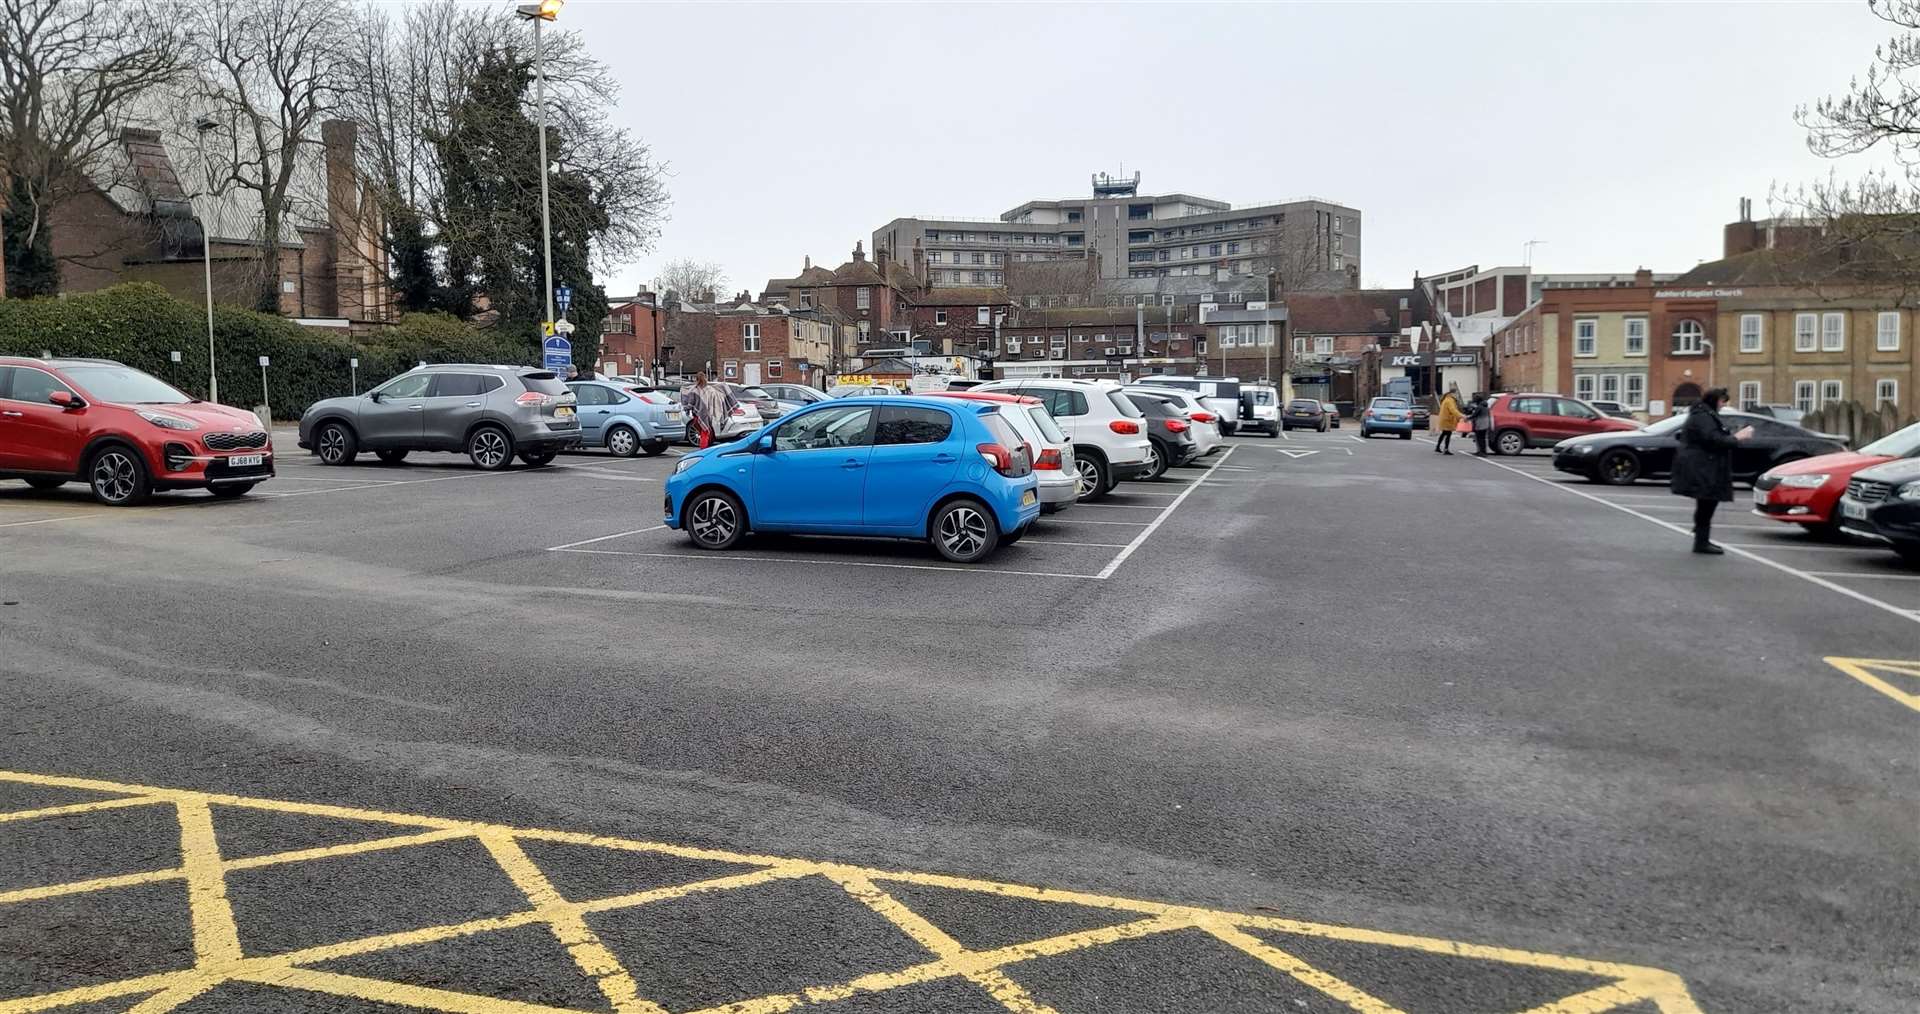 The Vicarage Lane car park in Ashford town centre was filling up at 9am